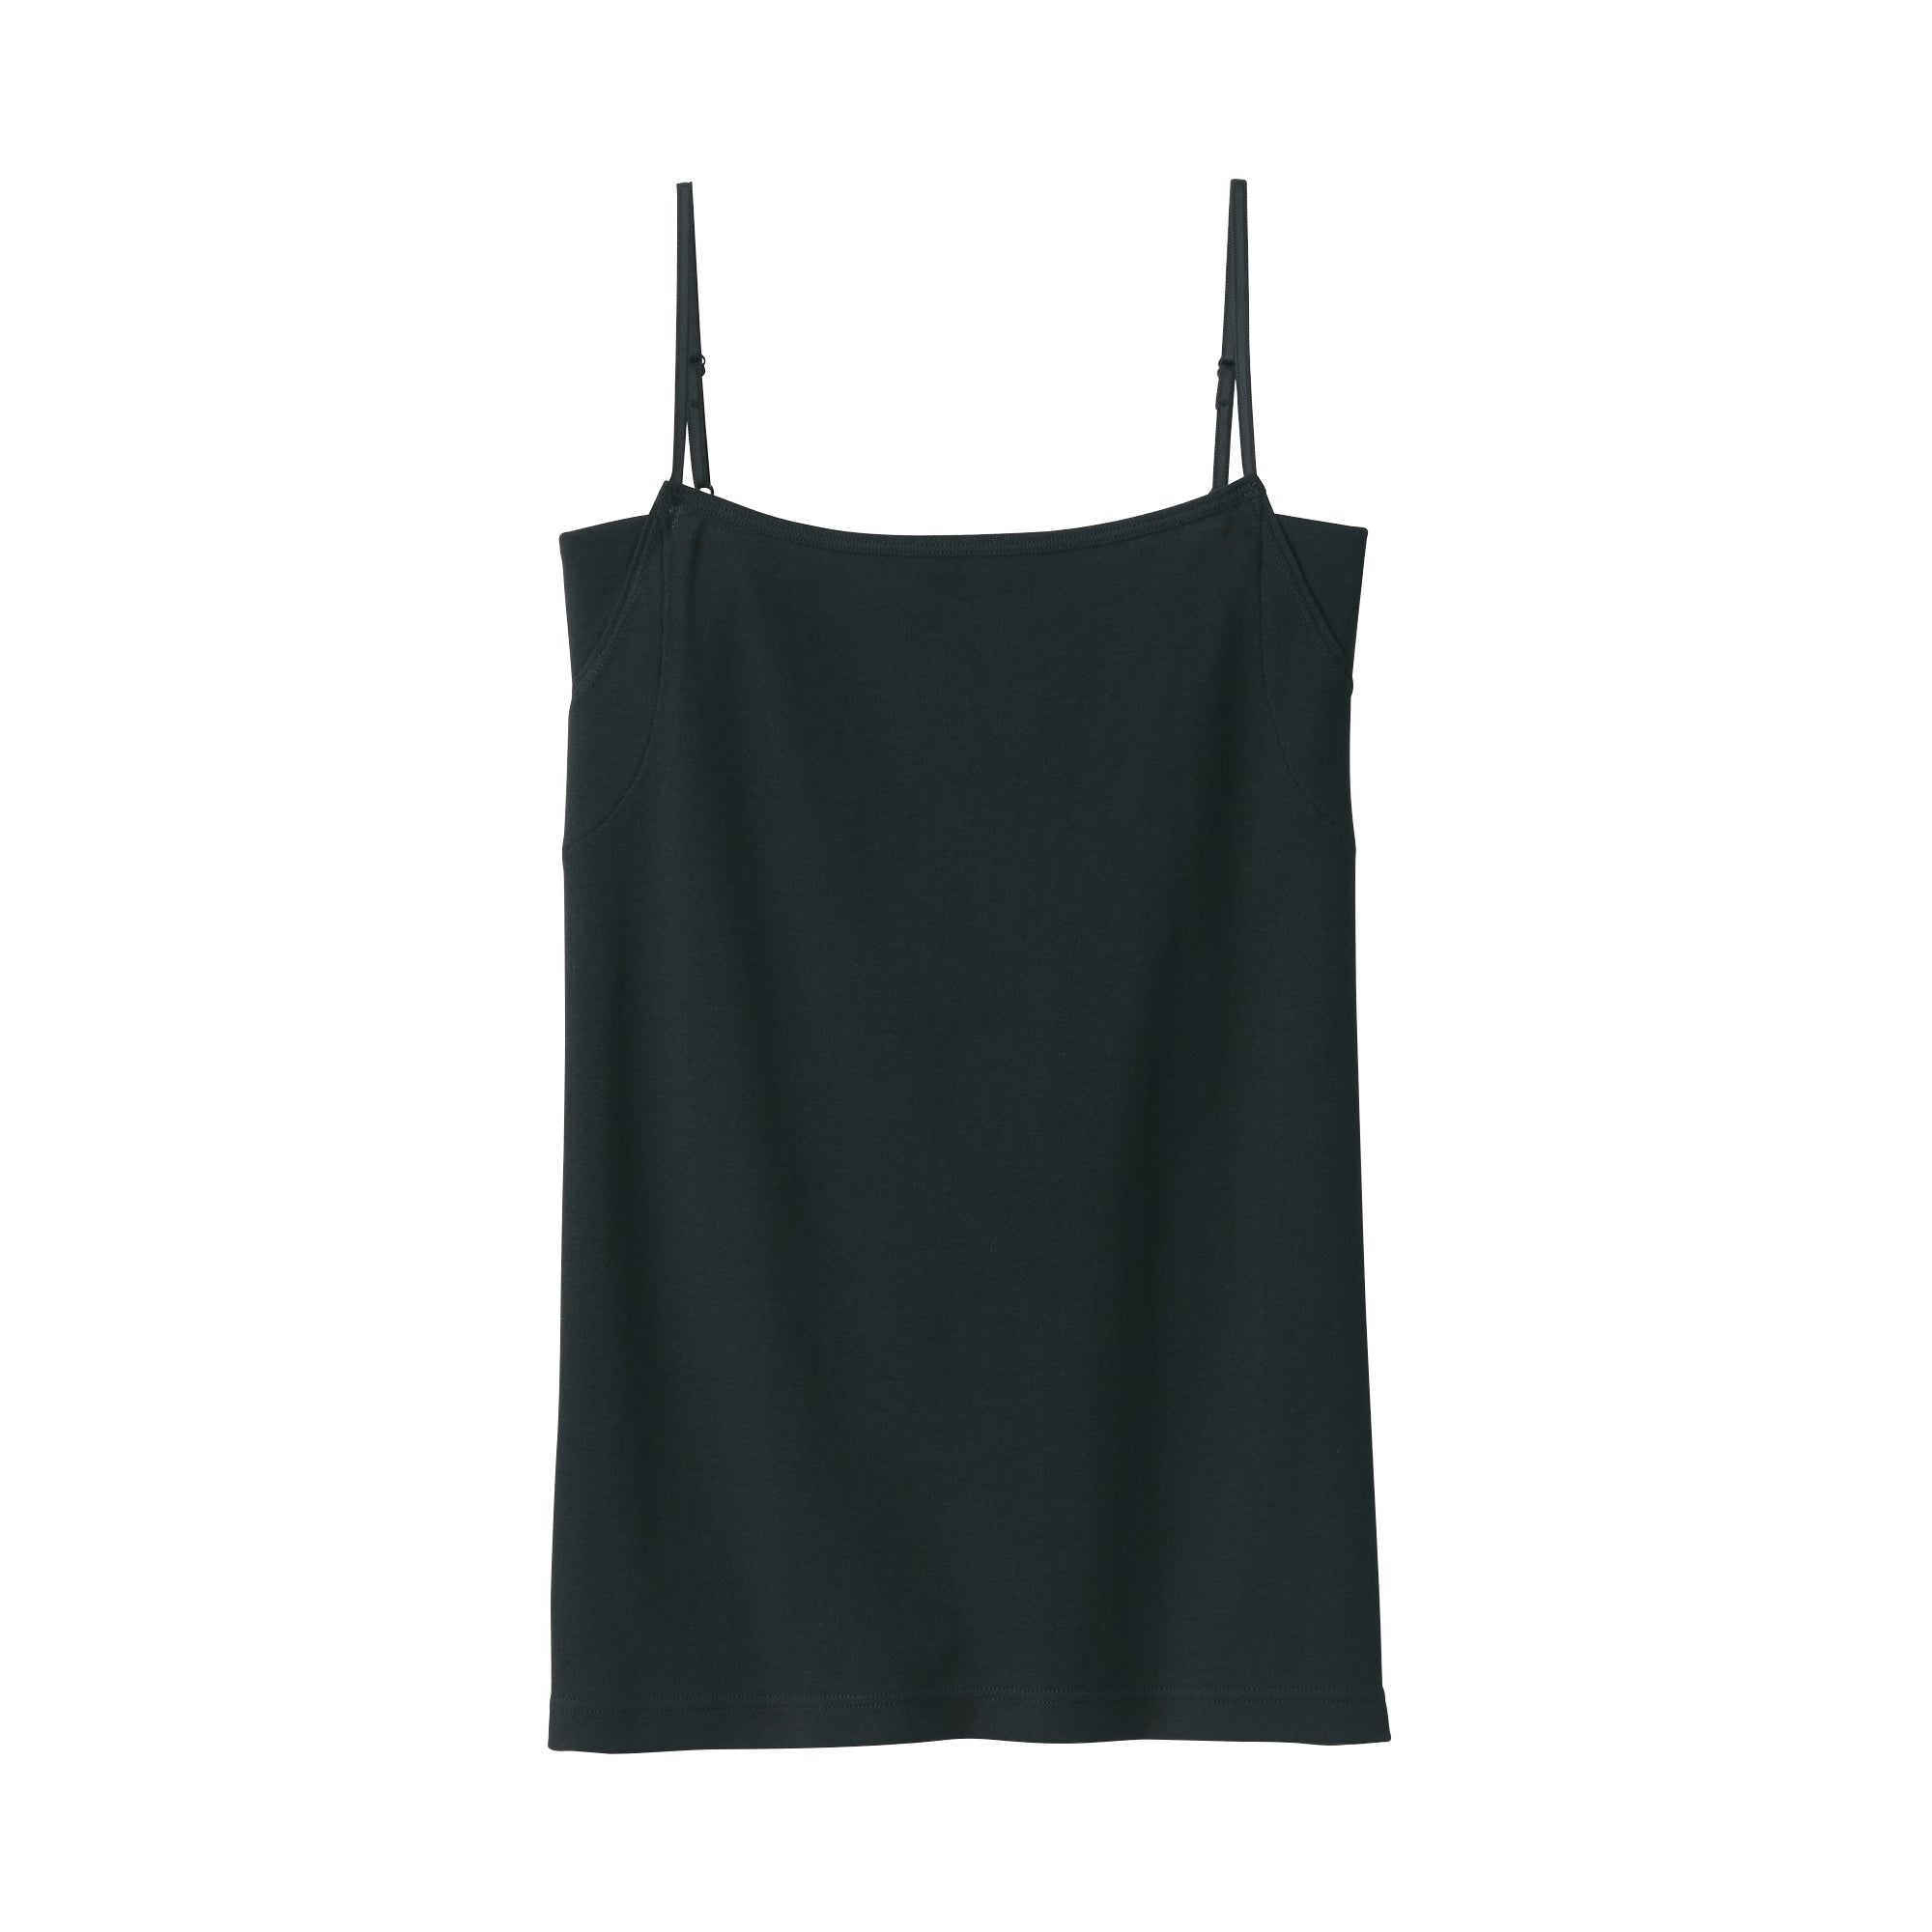 Women's Moisture Wicking Cotton Camisole with Sweat Pads